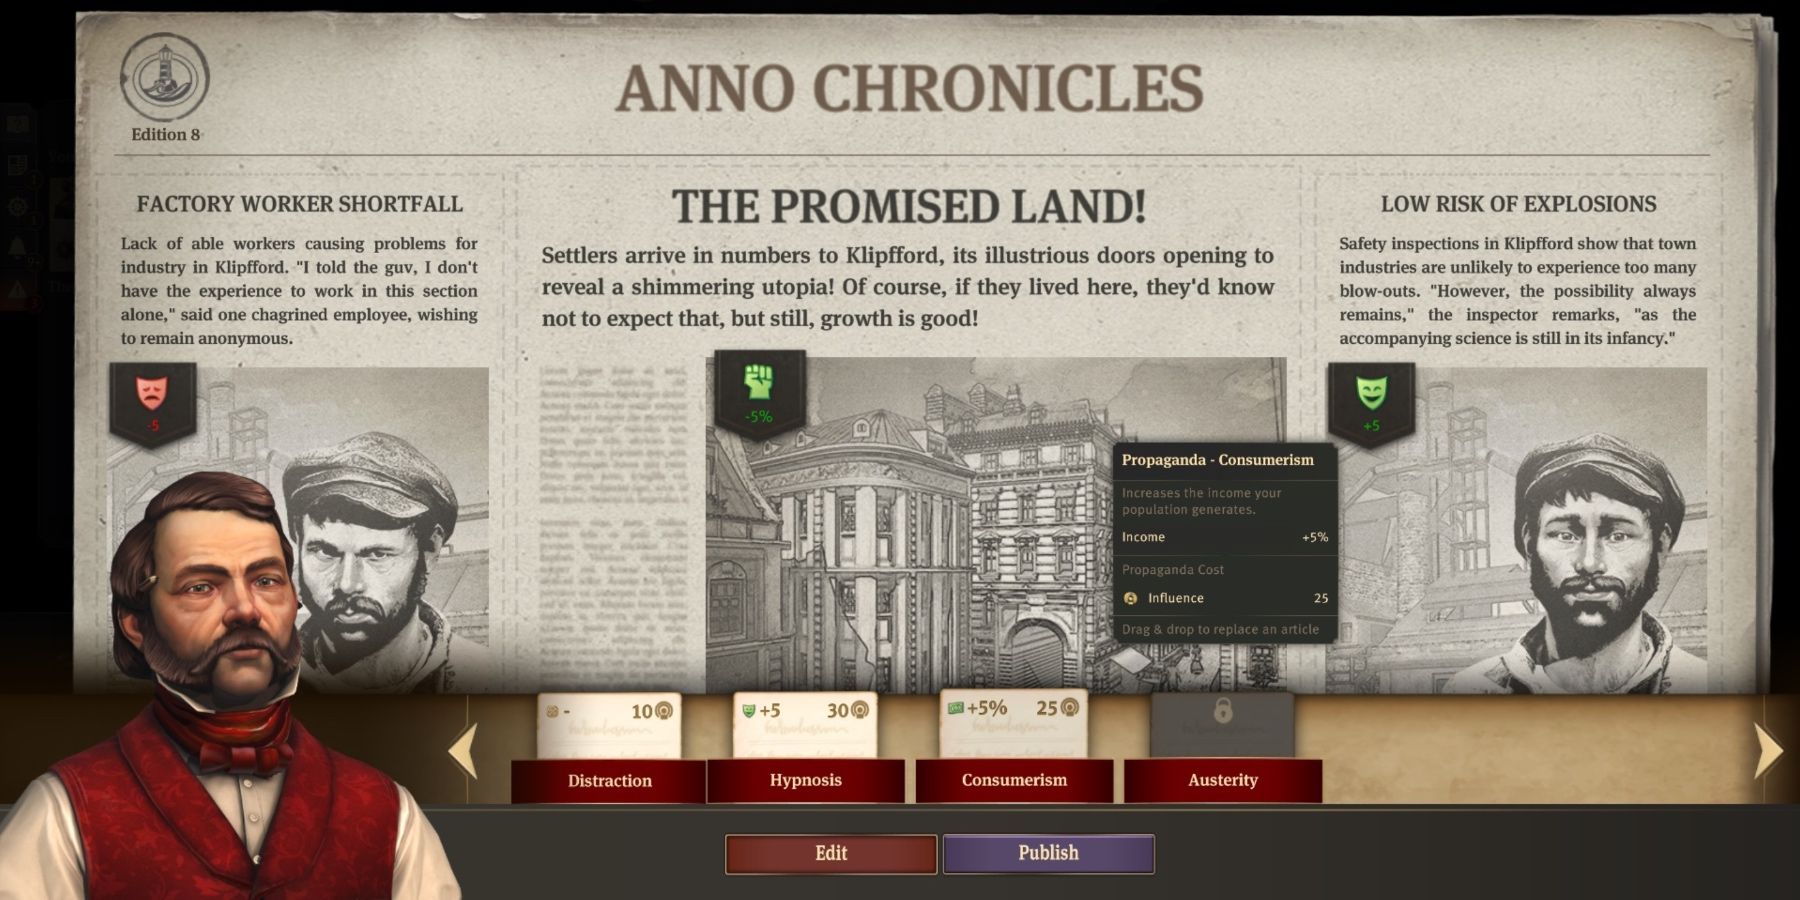 A newspaper called the Anno Chronicles which shows several articles and their effects on the citizens